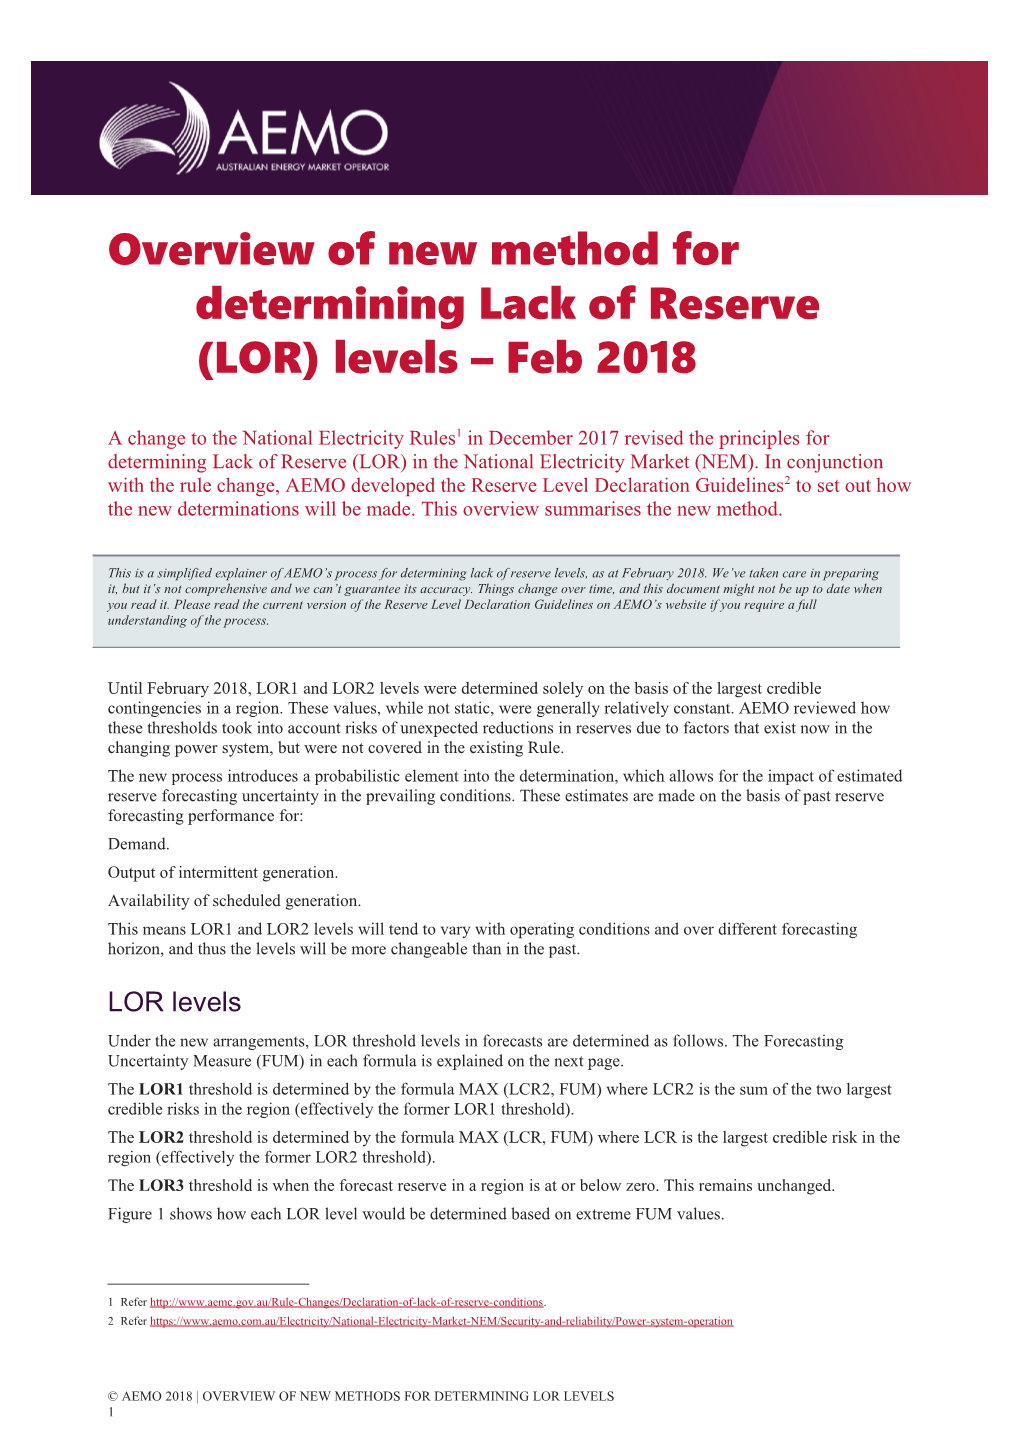 Overview of New Method for Determining LOR Levels - Feb 2018